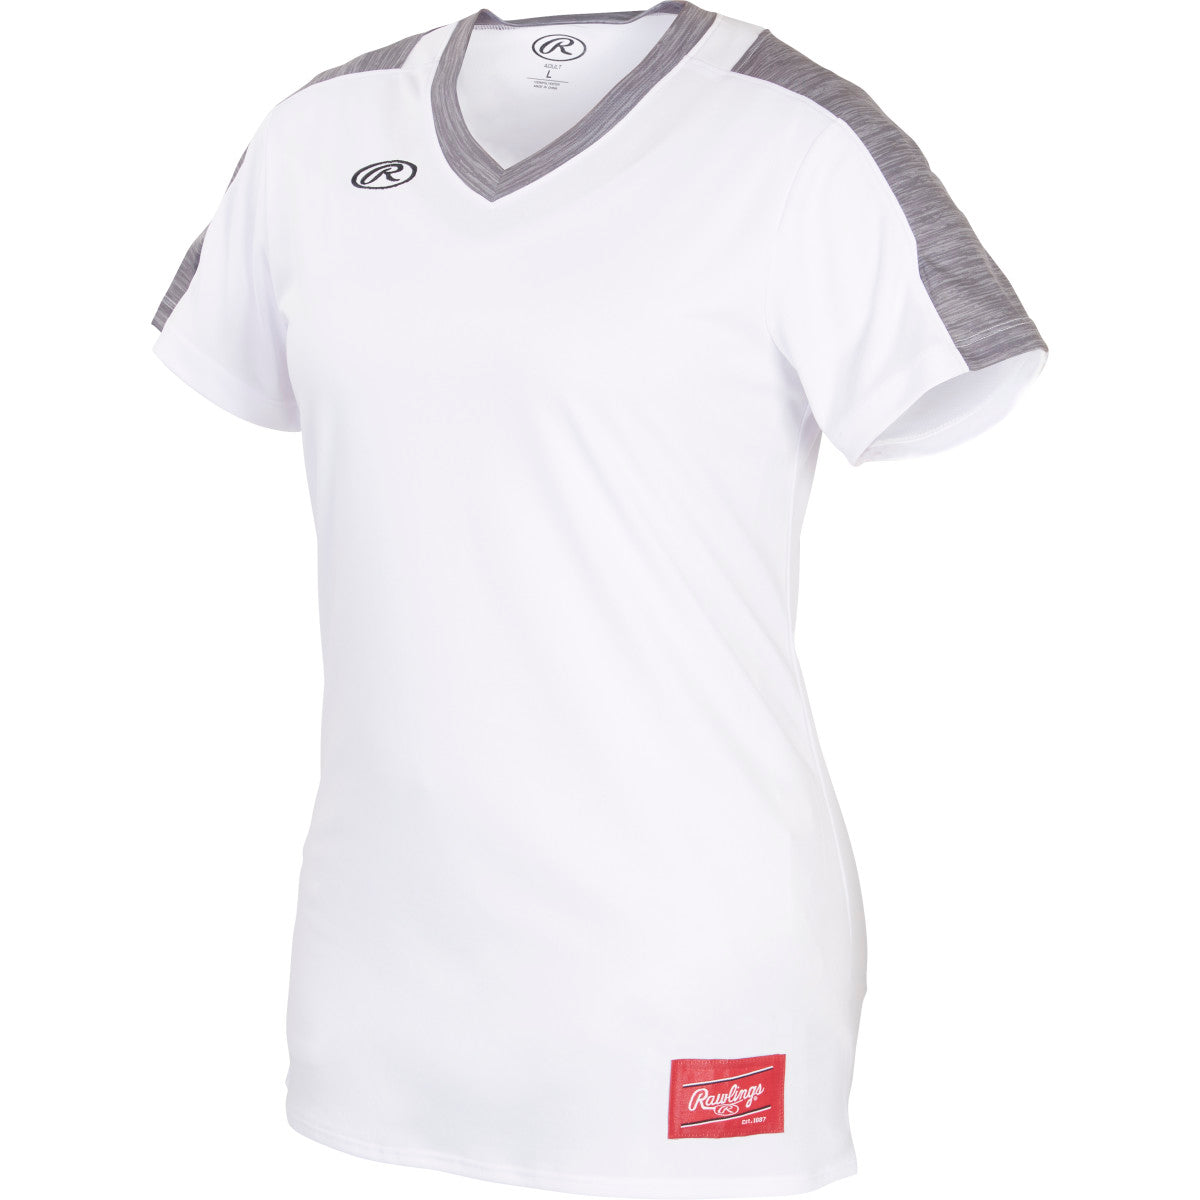 rawlings-wlnchj-launch-jersey